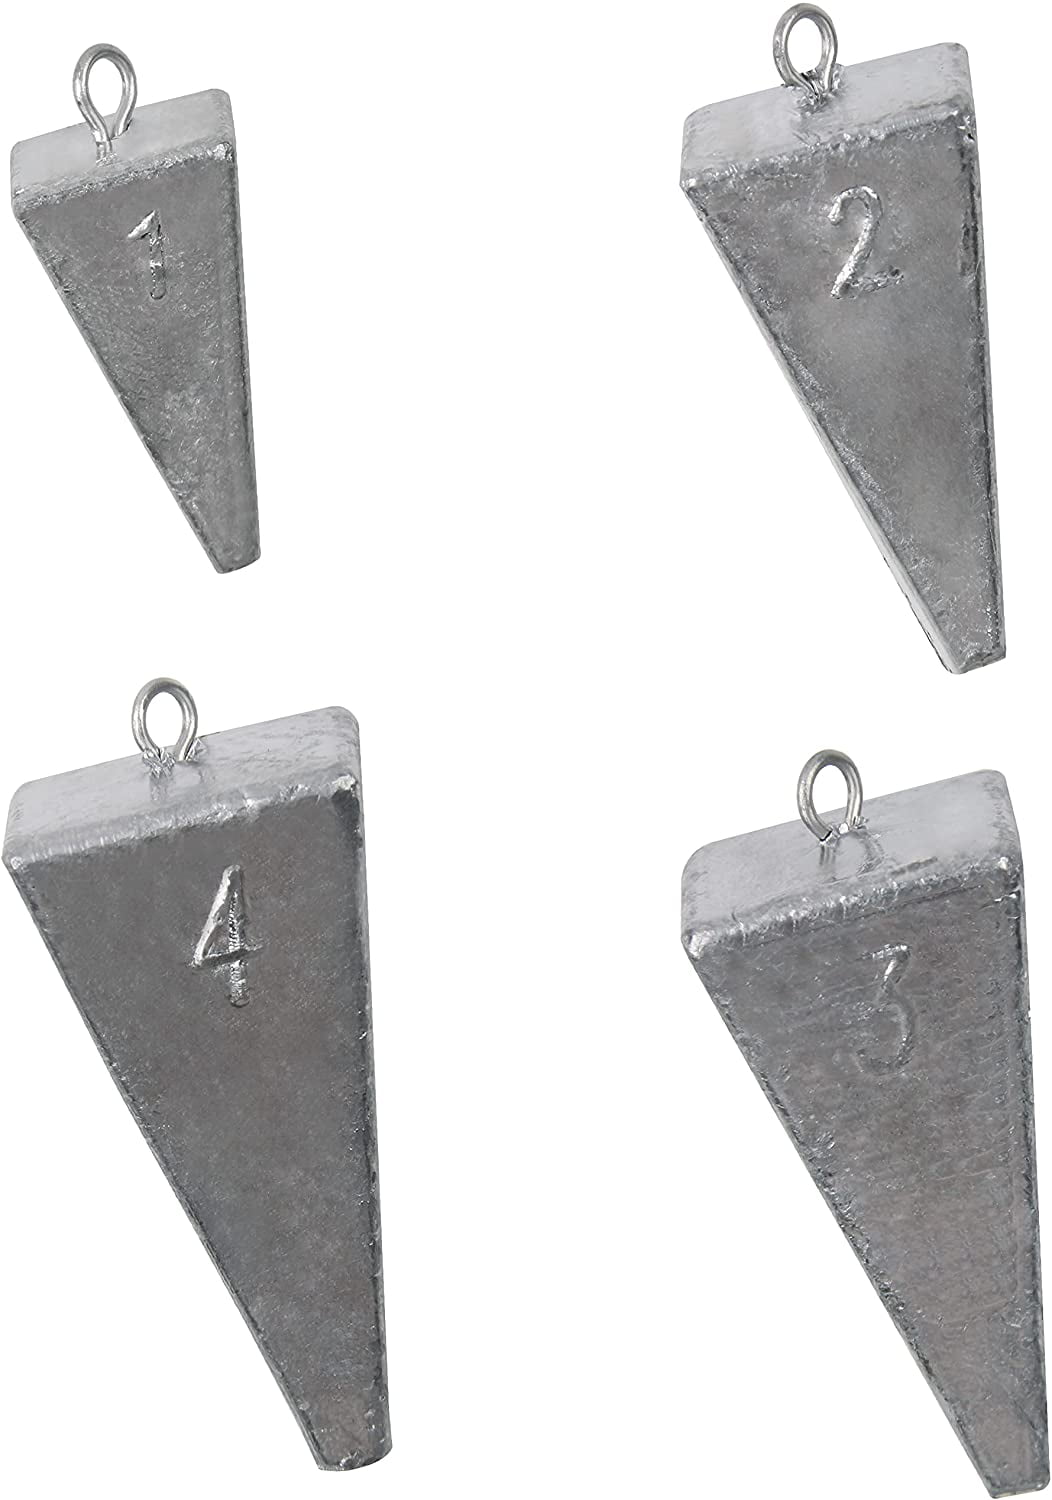 Pyramid Sinkers Fishing Weights,Fishing Sinker for Palestine